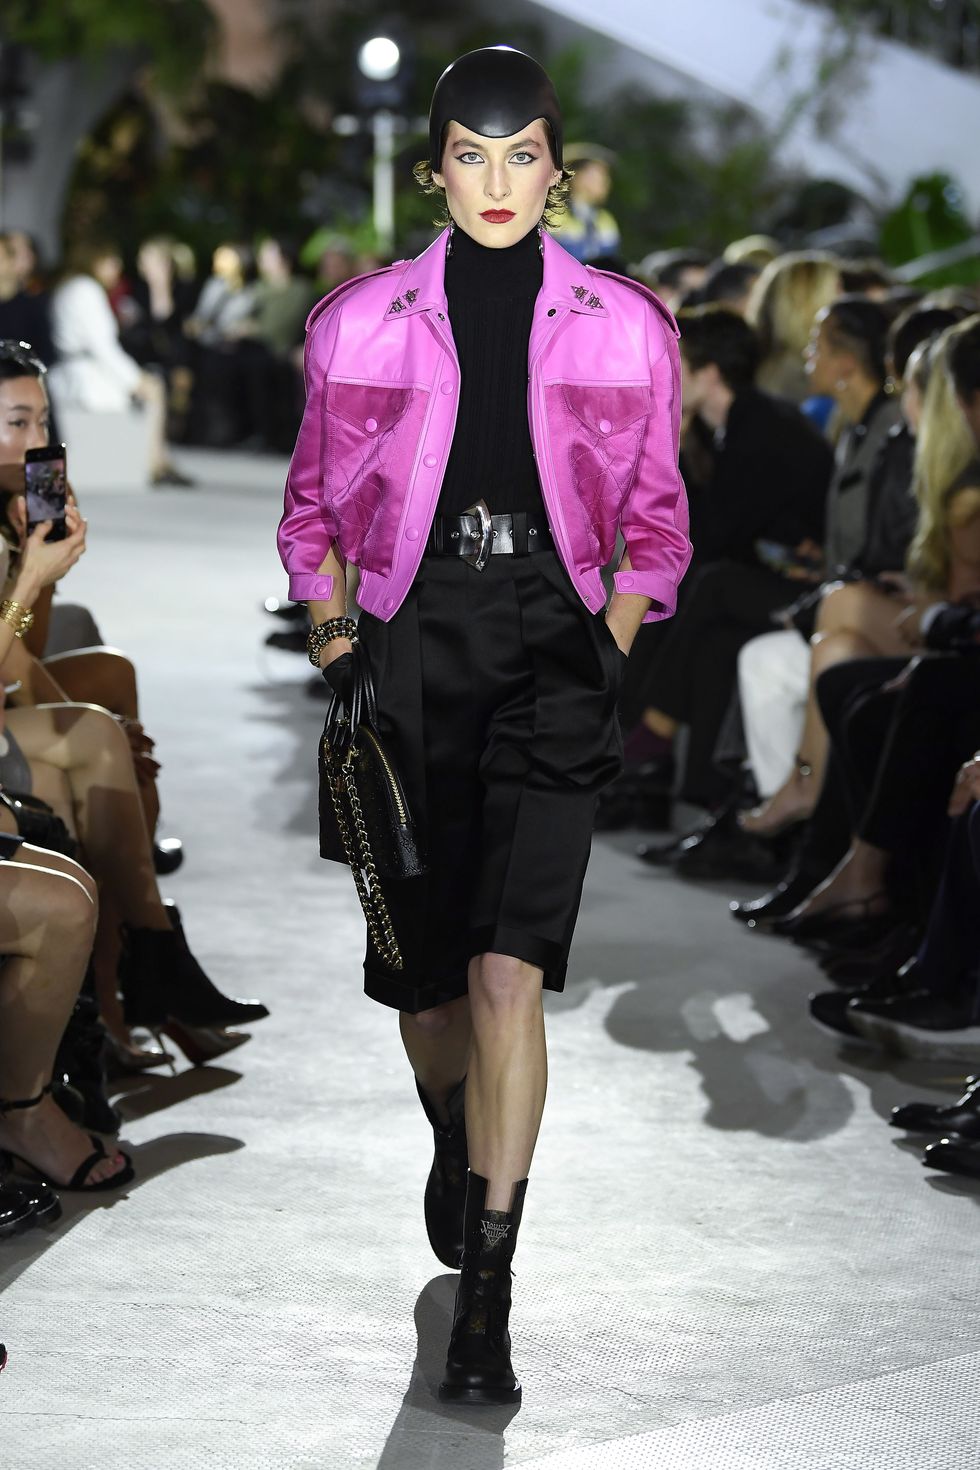 Louis Vuitton Cruise 2020 Takes Travel Back to the Airport - V